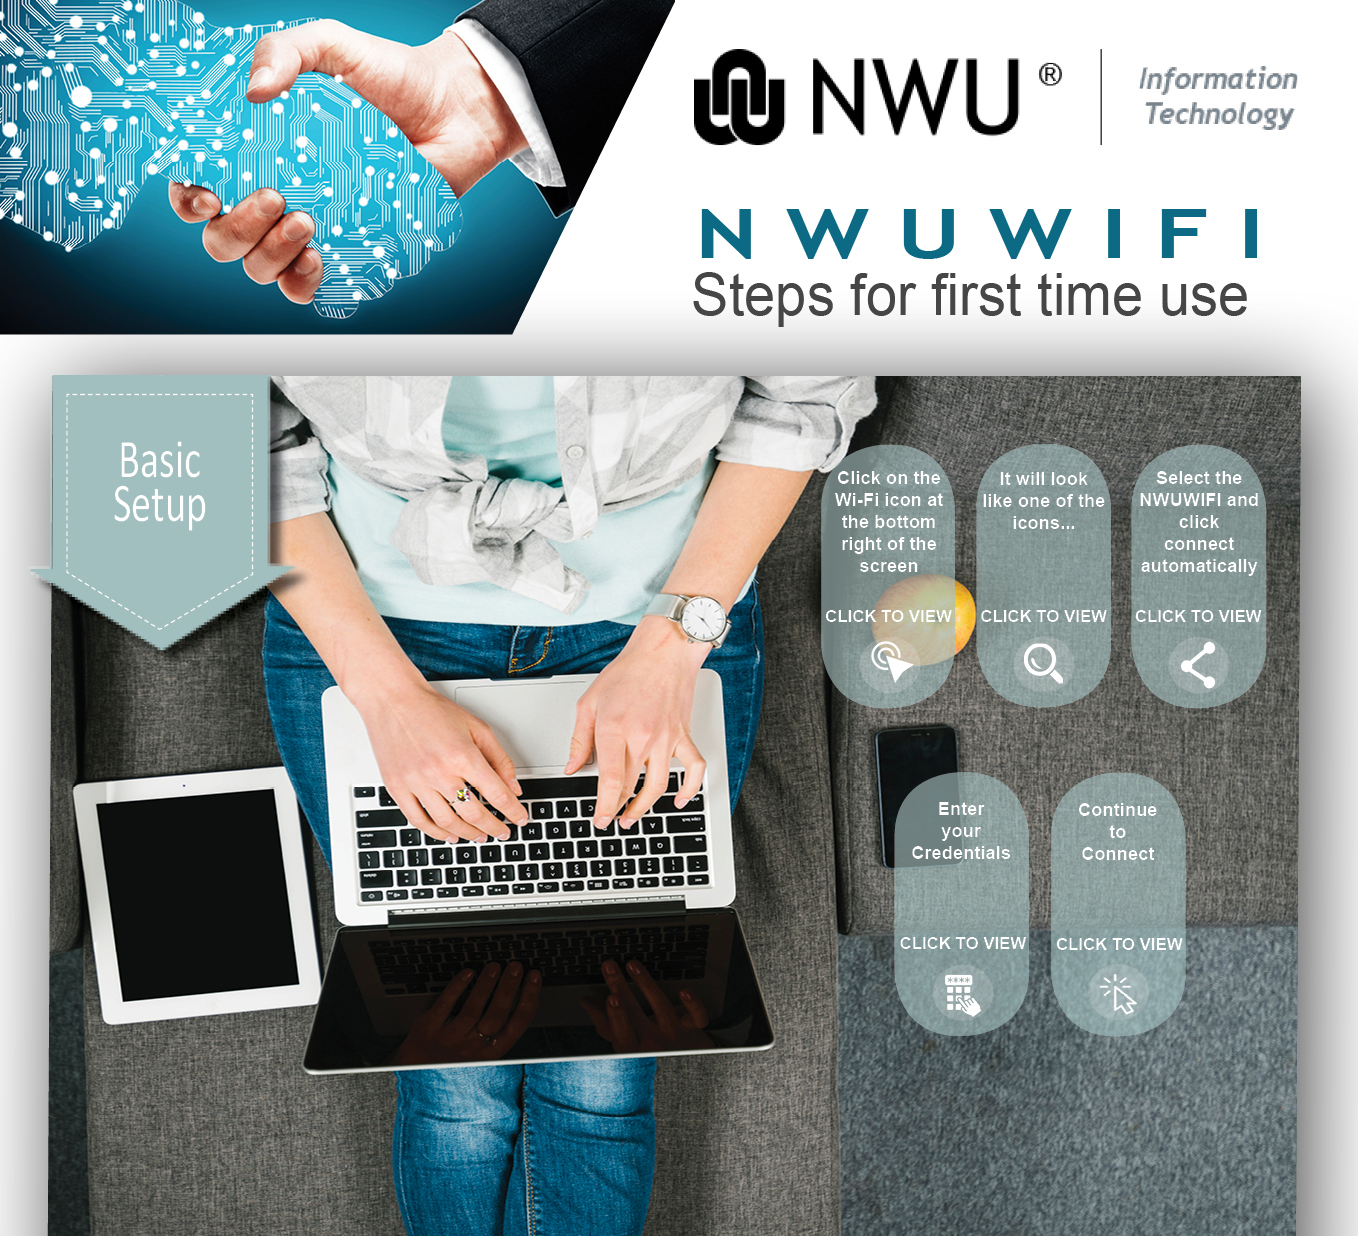 Clickable image to the pdf document - steps to NWUWIFI